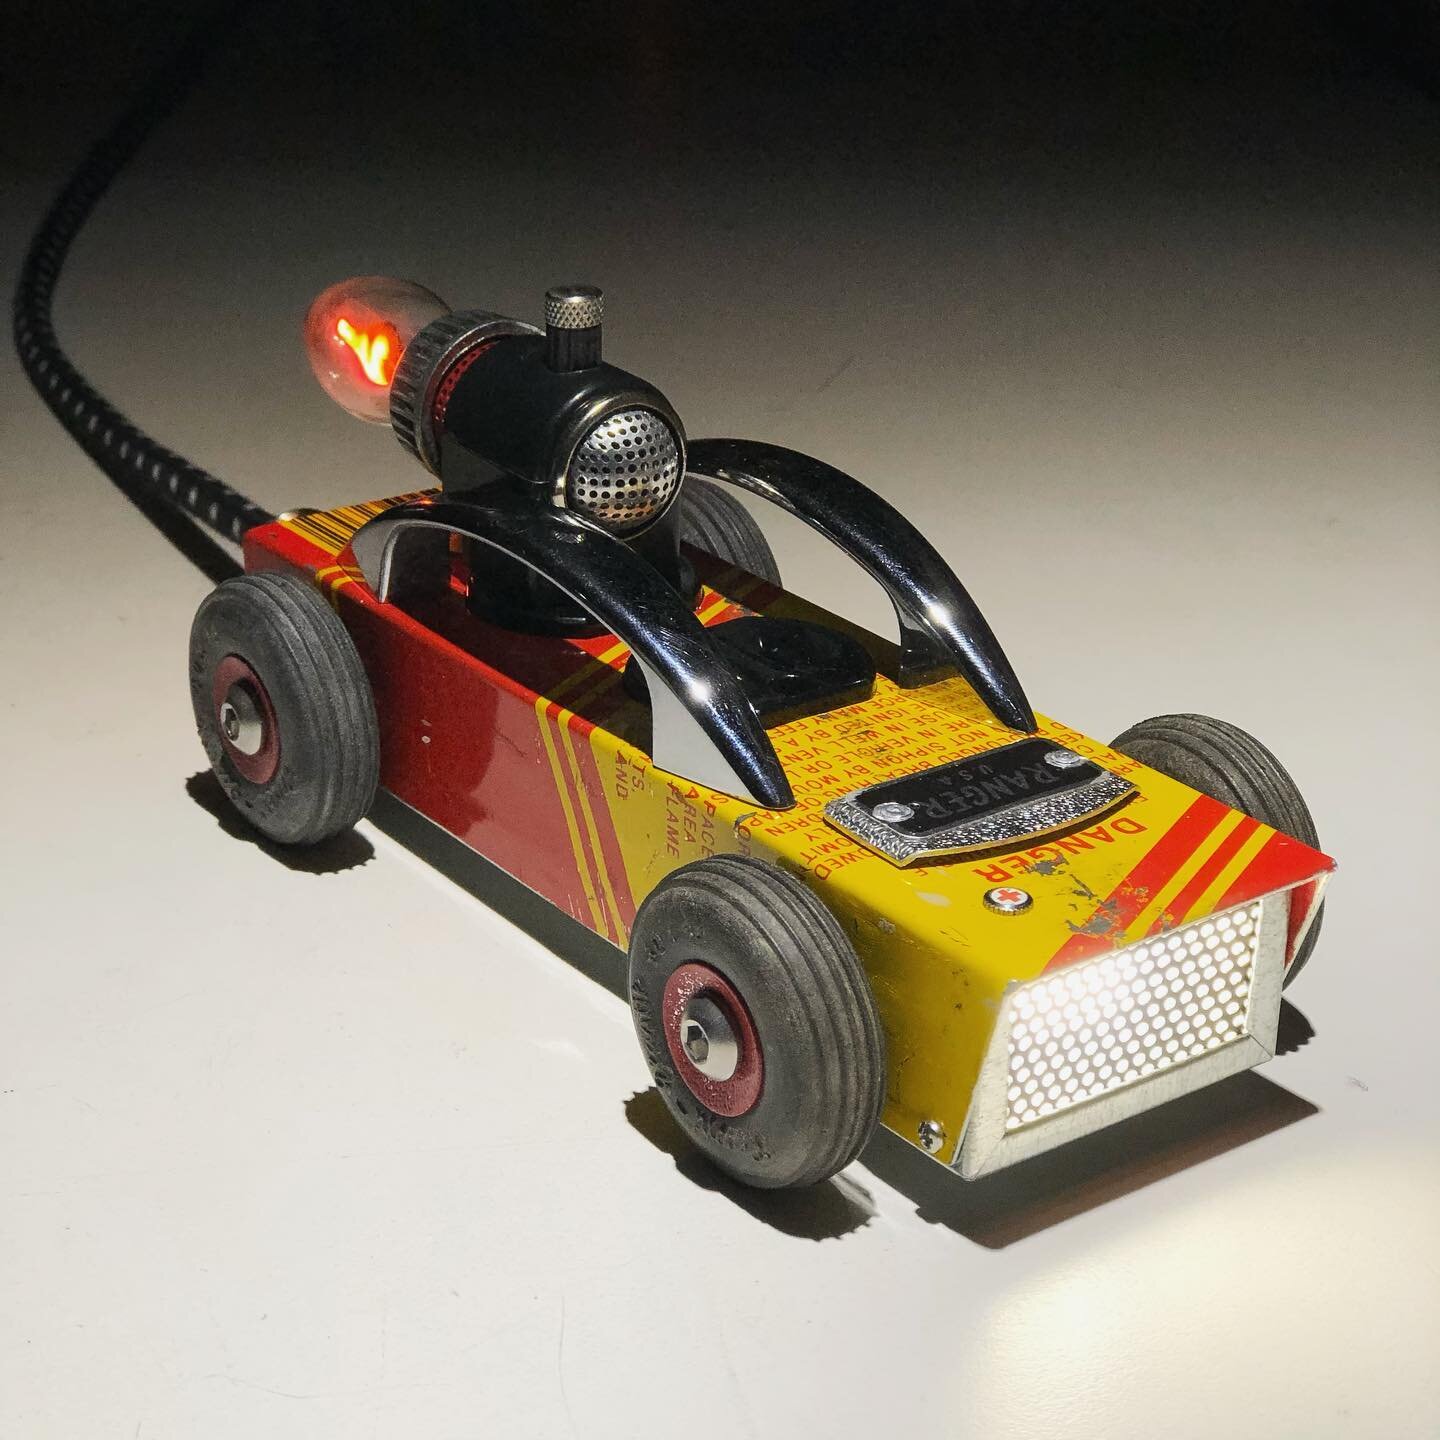 📍AUCTION ALERT⚒📍: Head over to @yumasymposium and bid on this one of a kind Ranger Danger: Car Table Lamp! Value:$275 
. 
. 
#toycar #toycars #rocketcar #jetcar #tincar #electriccar #gasoline #gascan #extensioncord #customtoycars #nightlight #tinto